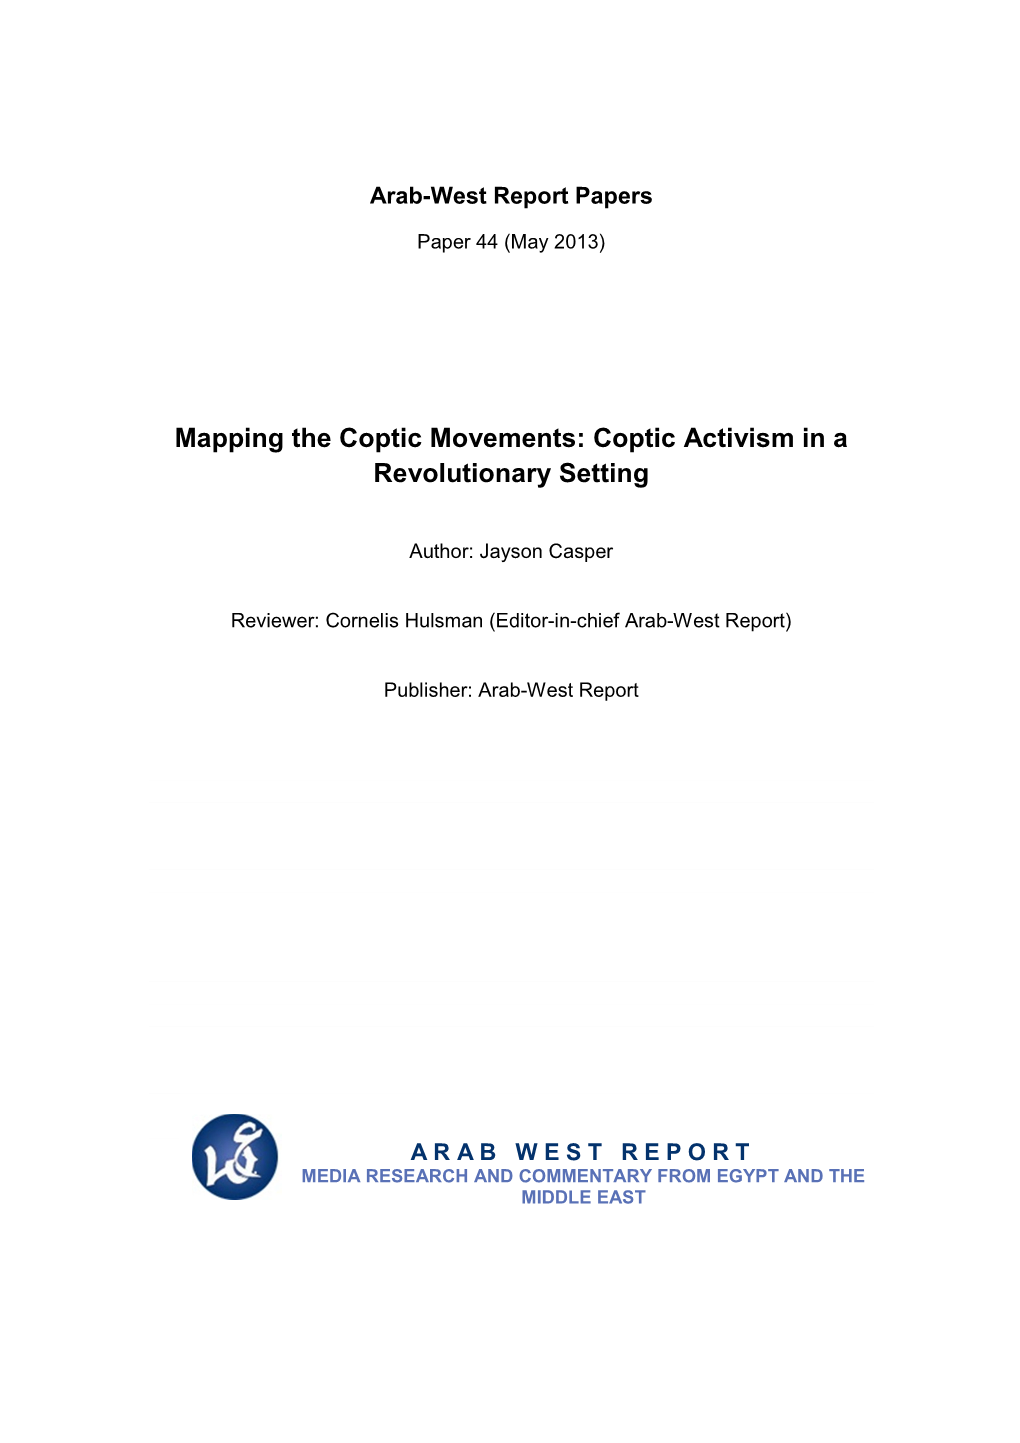 Mapping the Coptic Movements: Coptic Activism in a Revolutionary Setting